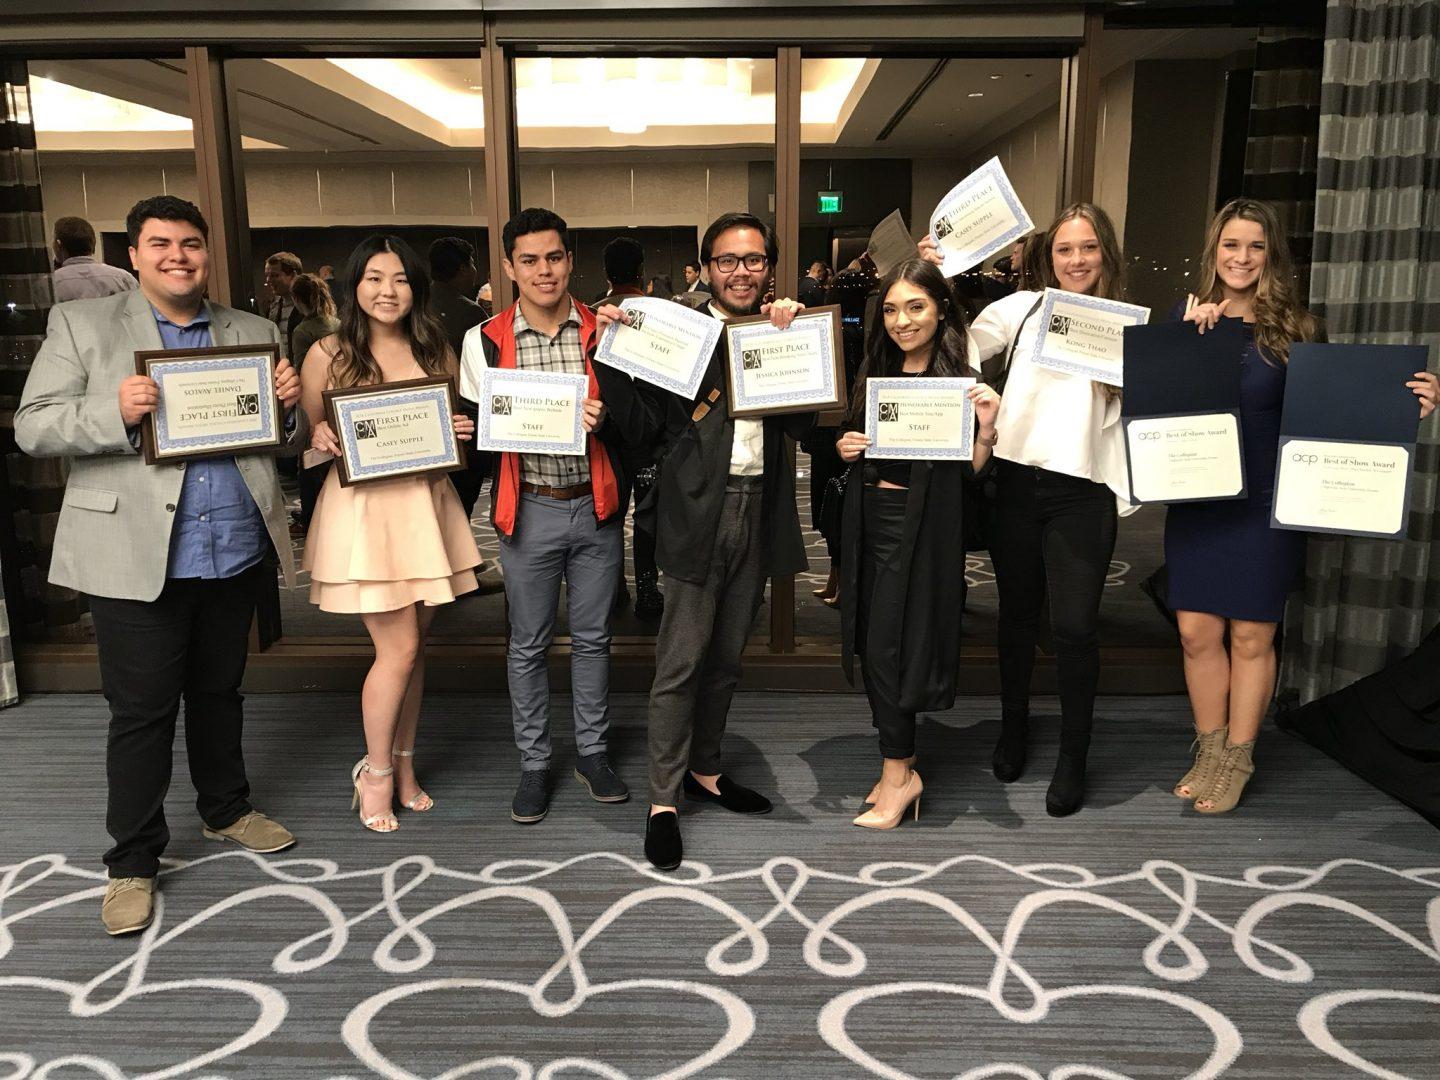 Eight members of The Collegian traveled to Long Beach between March 1-3 for the annual journalism and awards conference hosted by the Associate Collegiate Press and the California College Media Association. The Collegian won 10 awards.